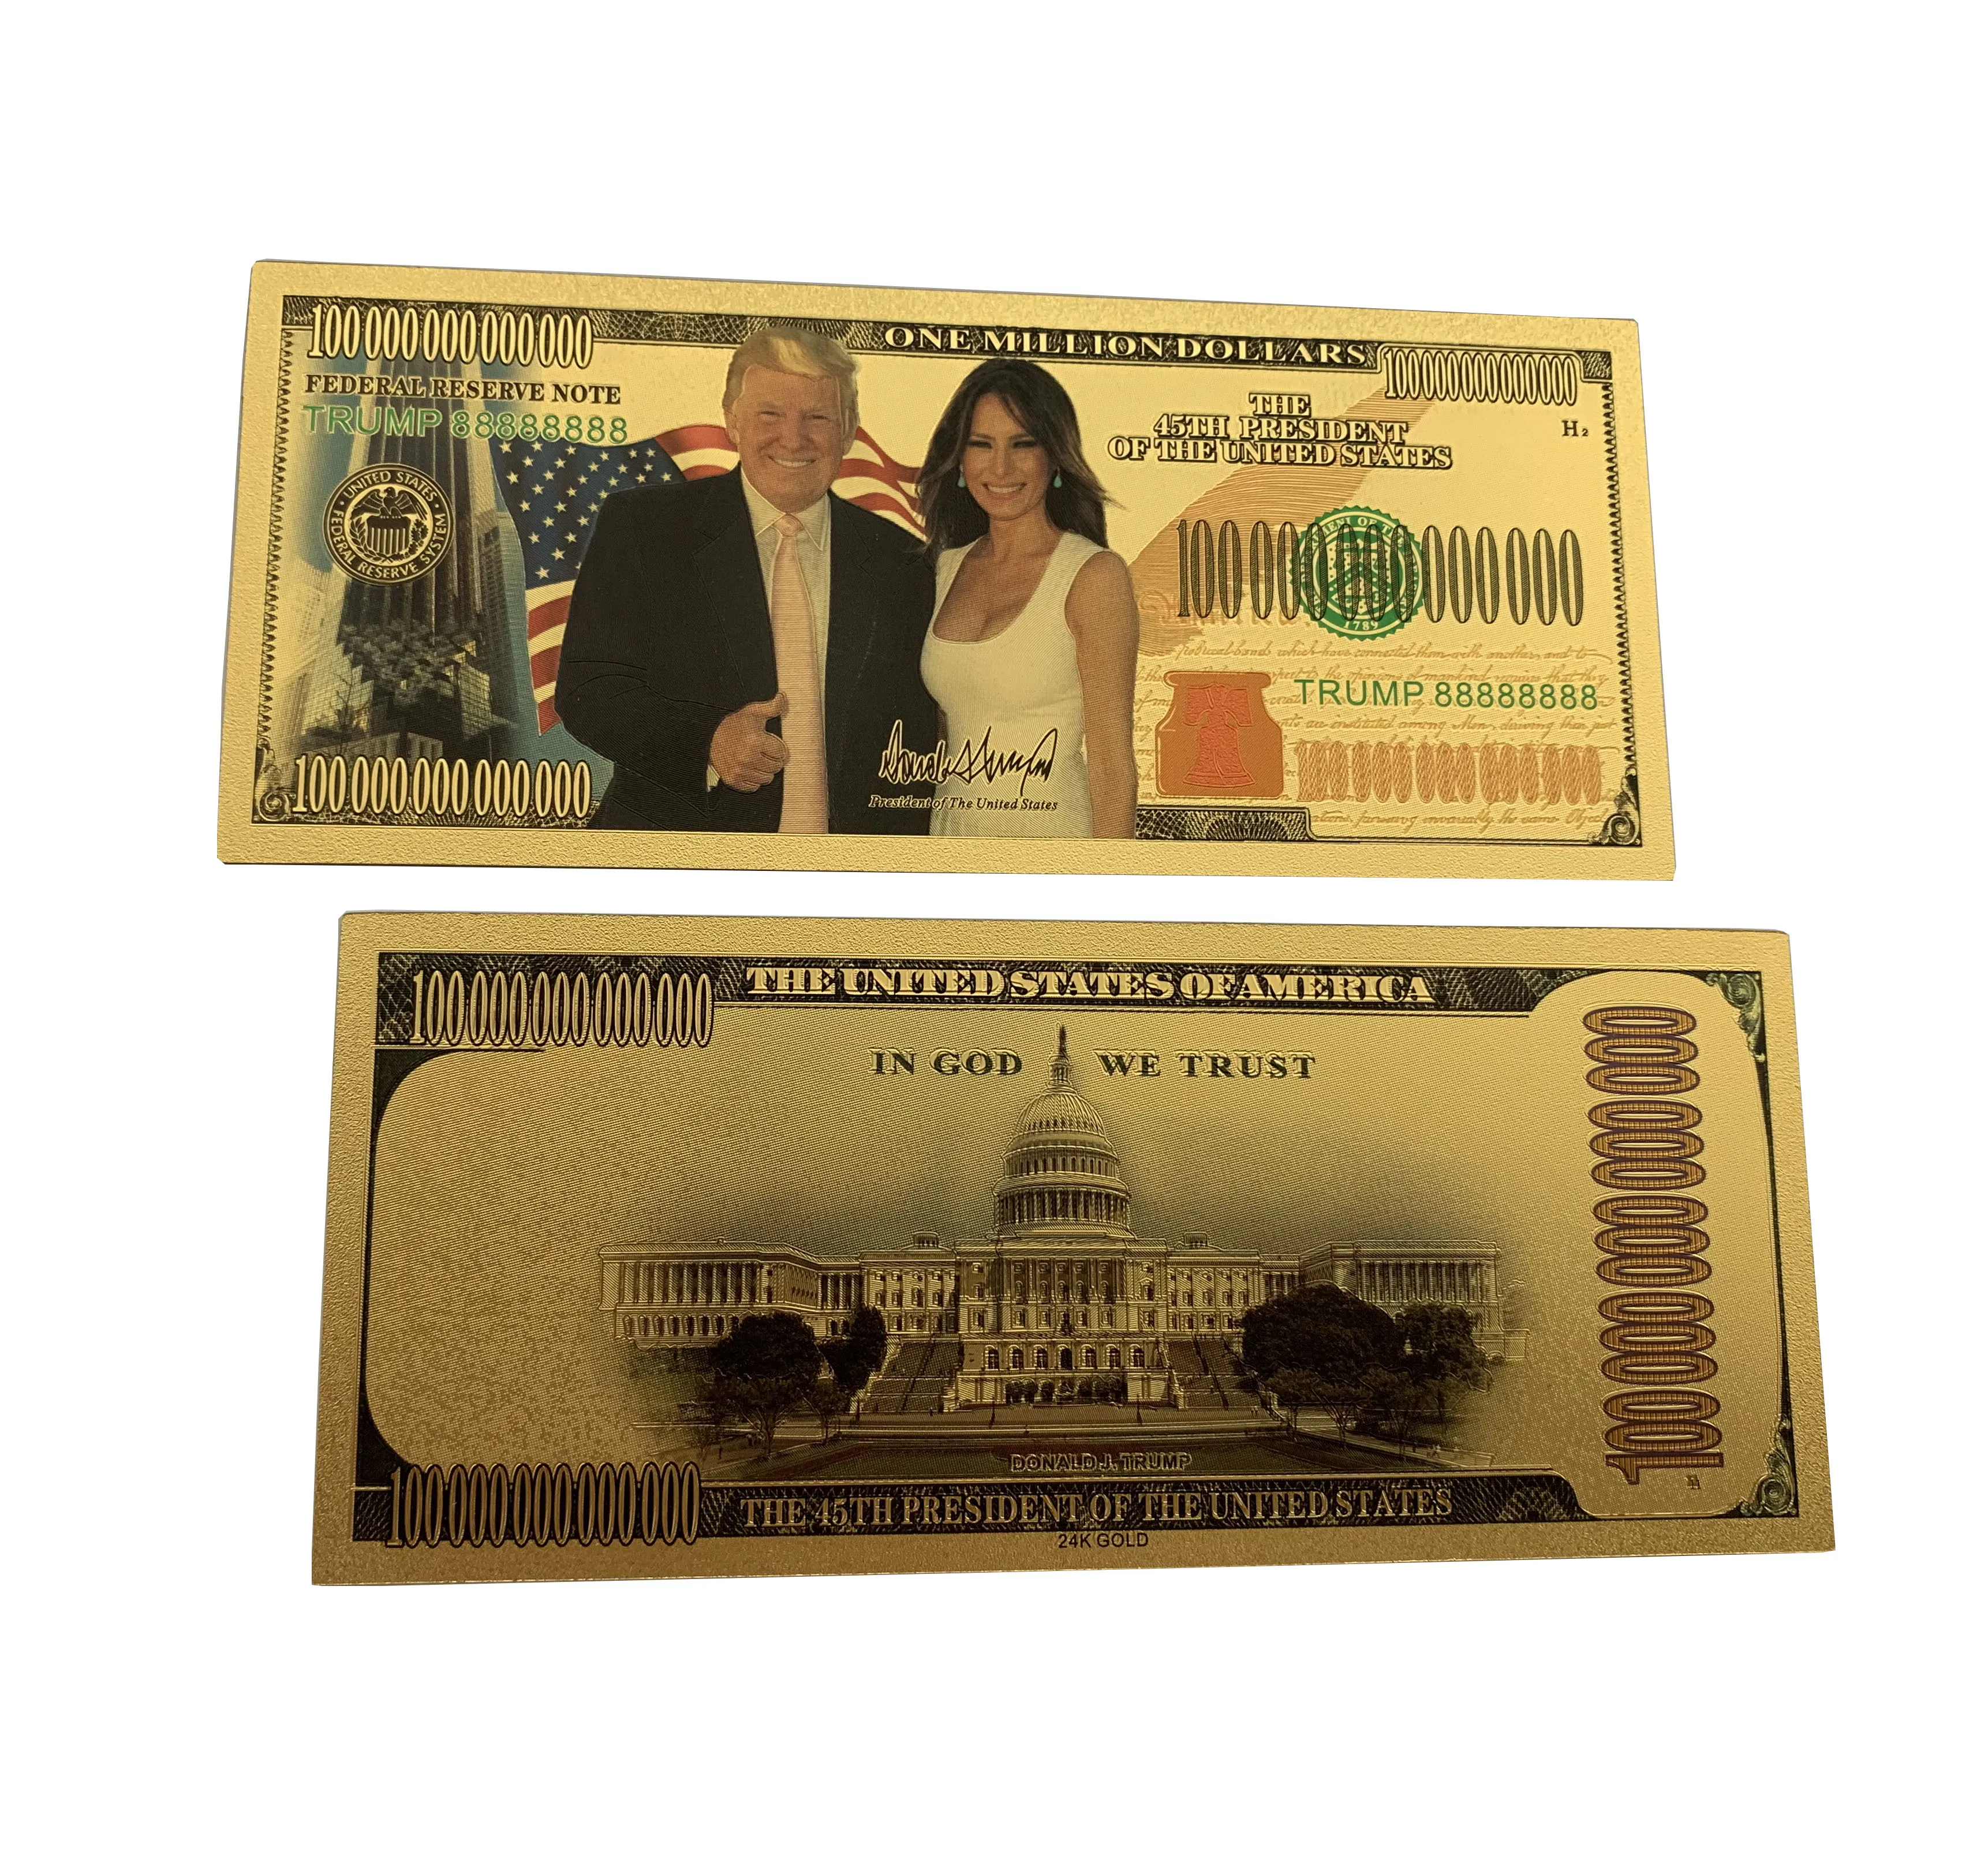 

2020 gold foil currency collection USA Melania Trump banknote trump gold foil dollar bills